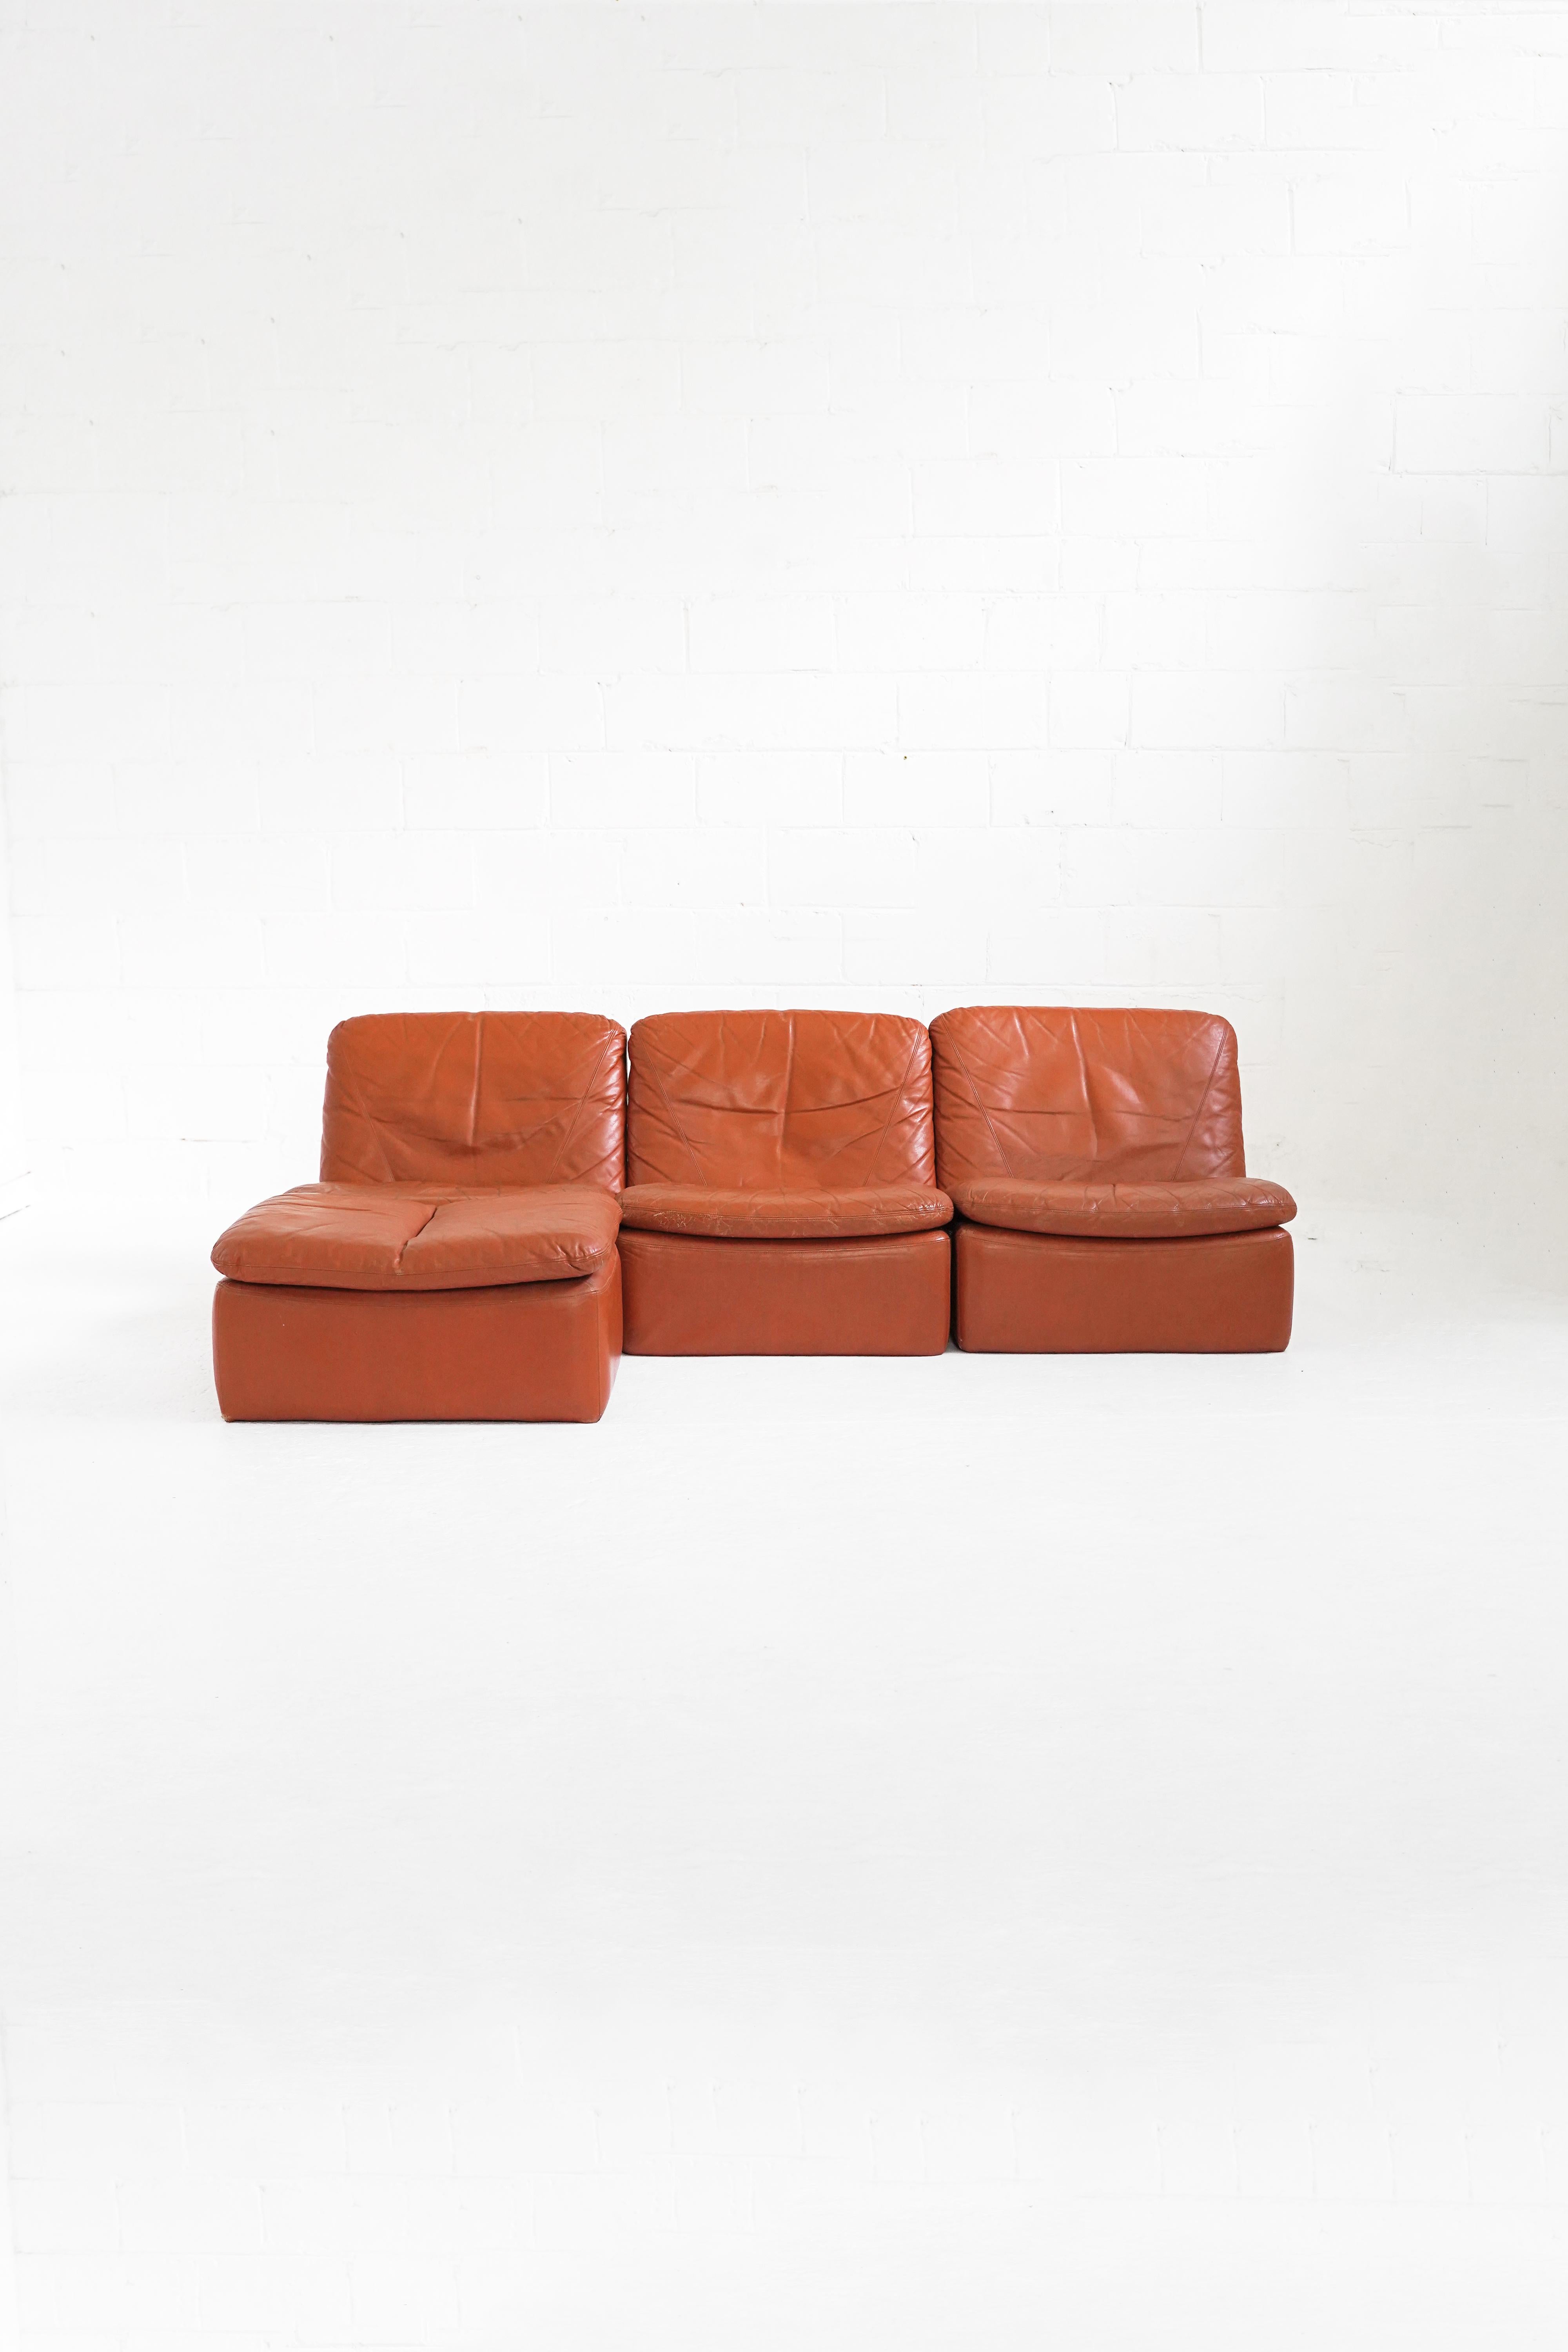 Mid-20th Century Vintage Modular Leather Sectional Sofa and Coffee Table C300 by Interna Design